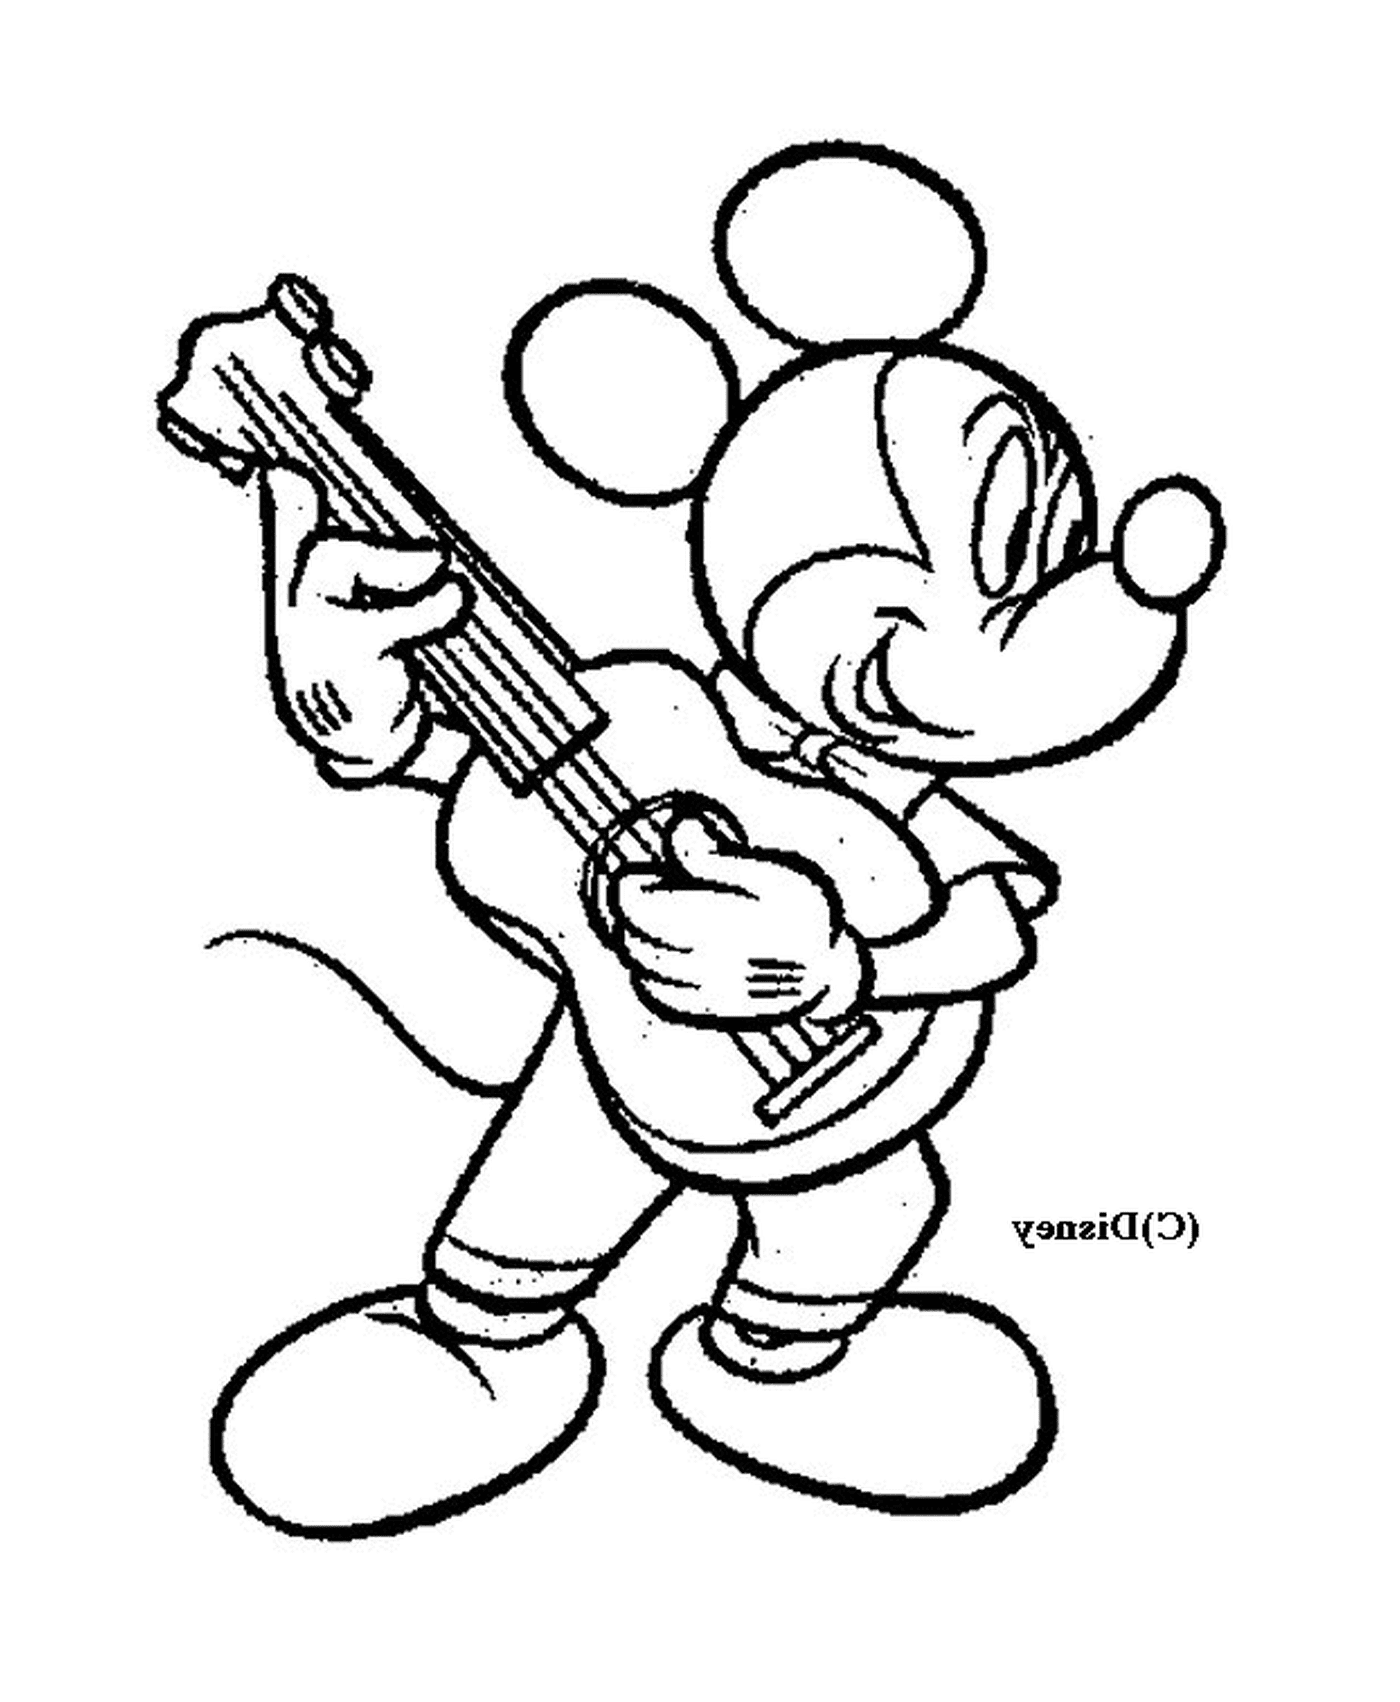  Mickey plays guitar: Mickey Mouse playing guitar 